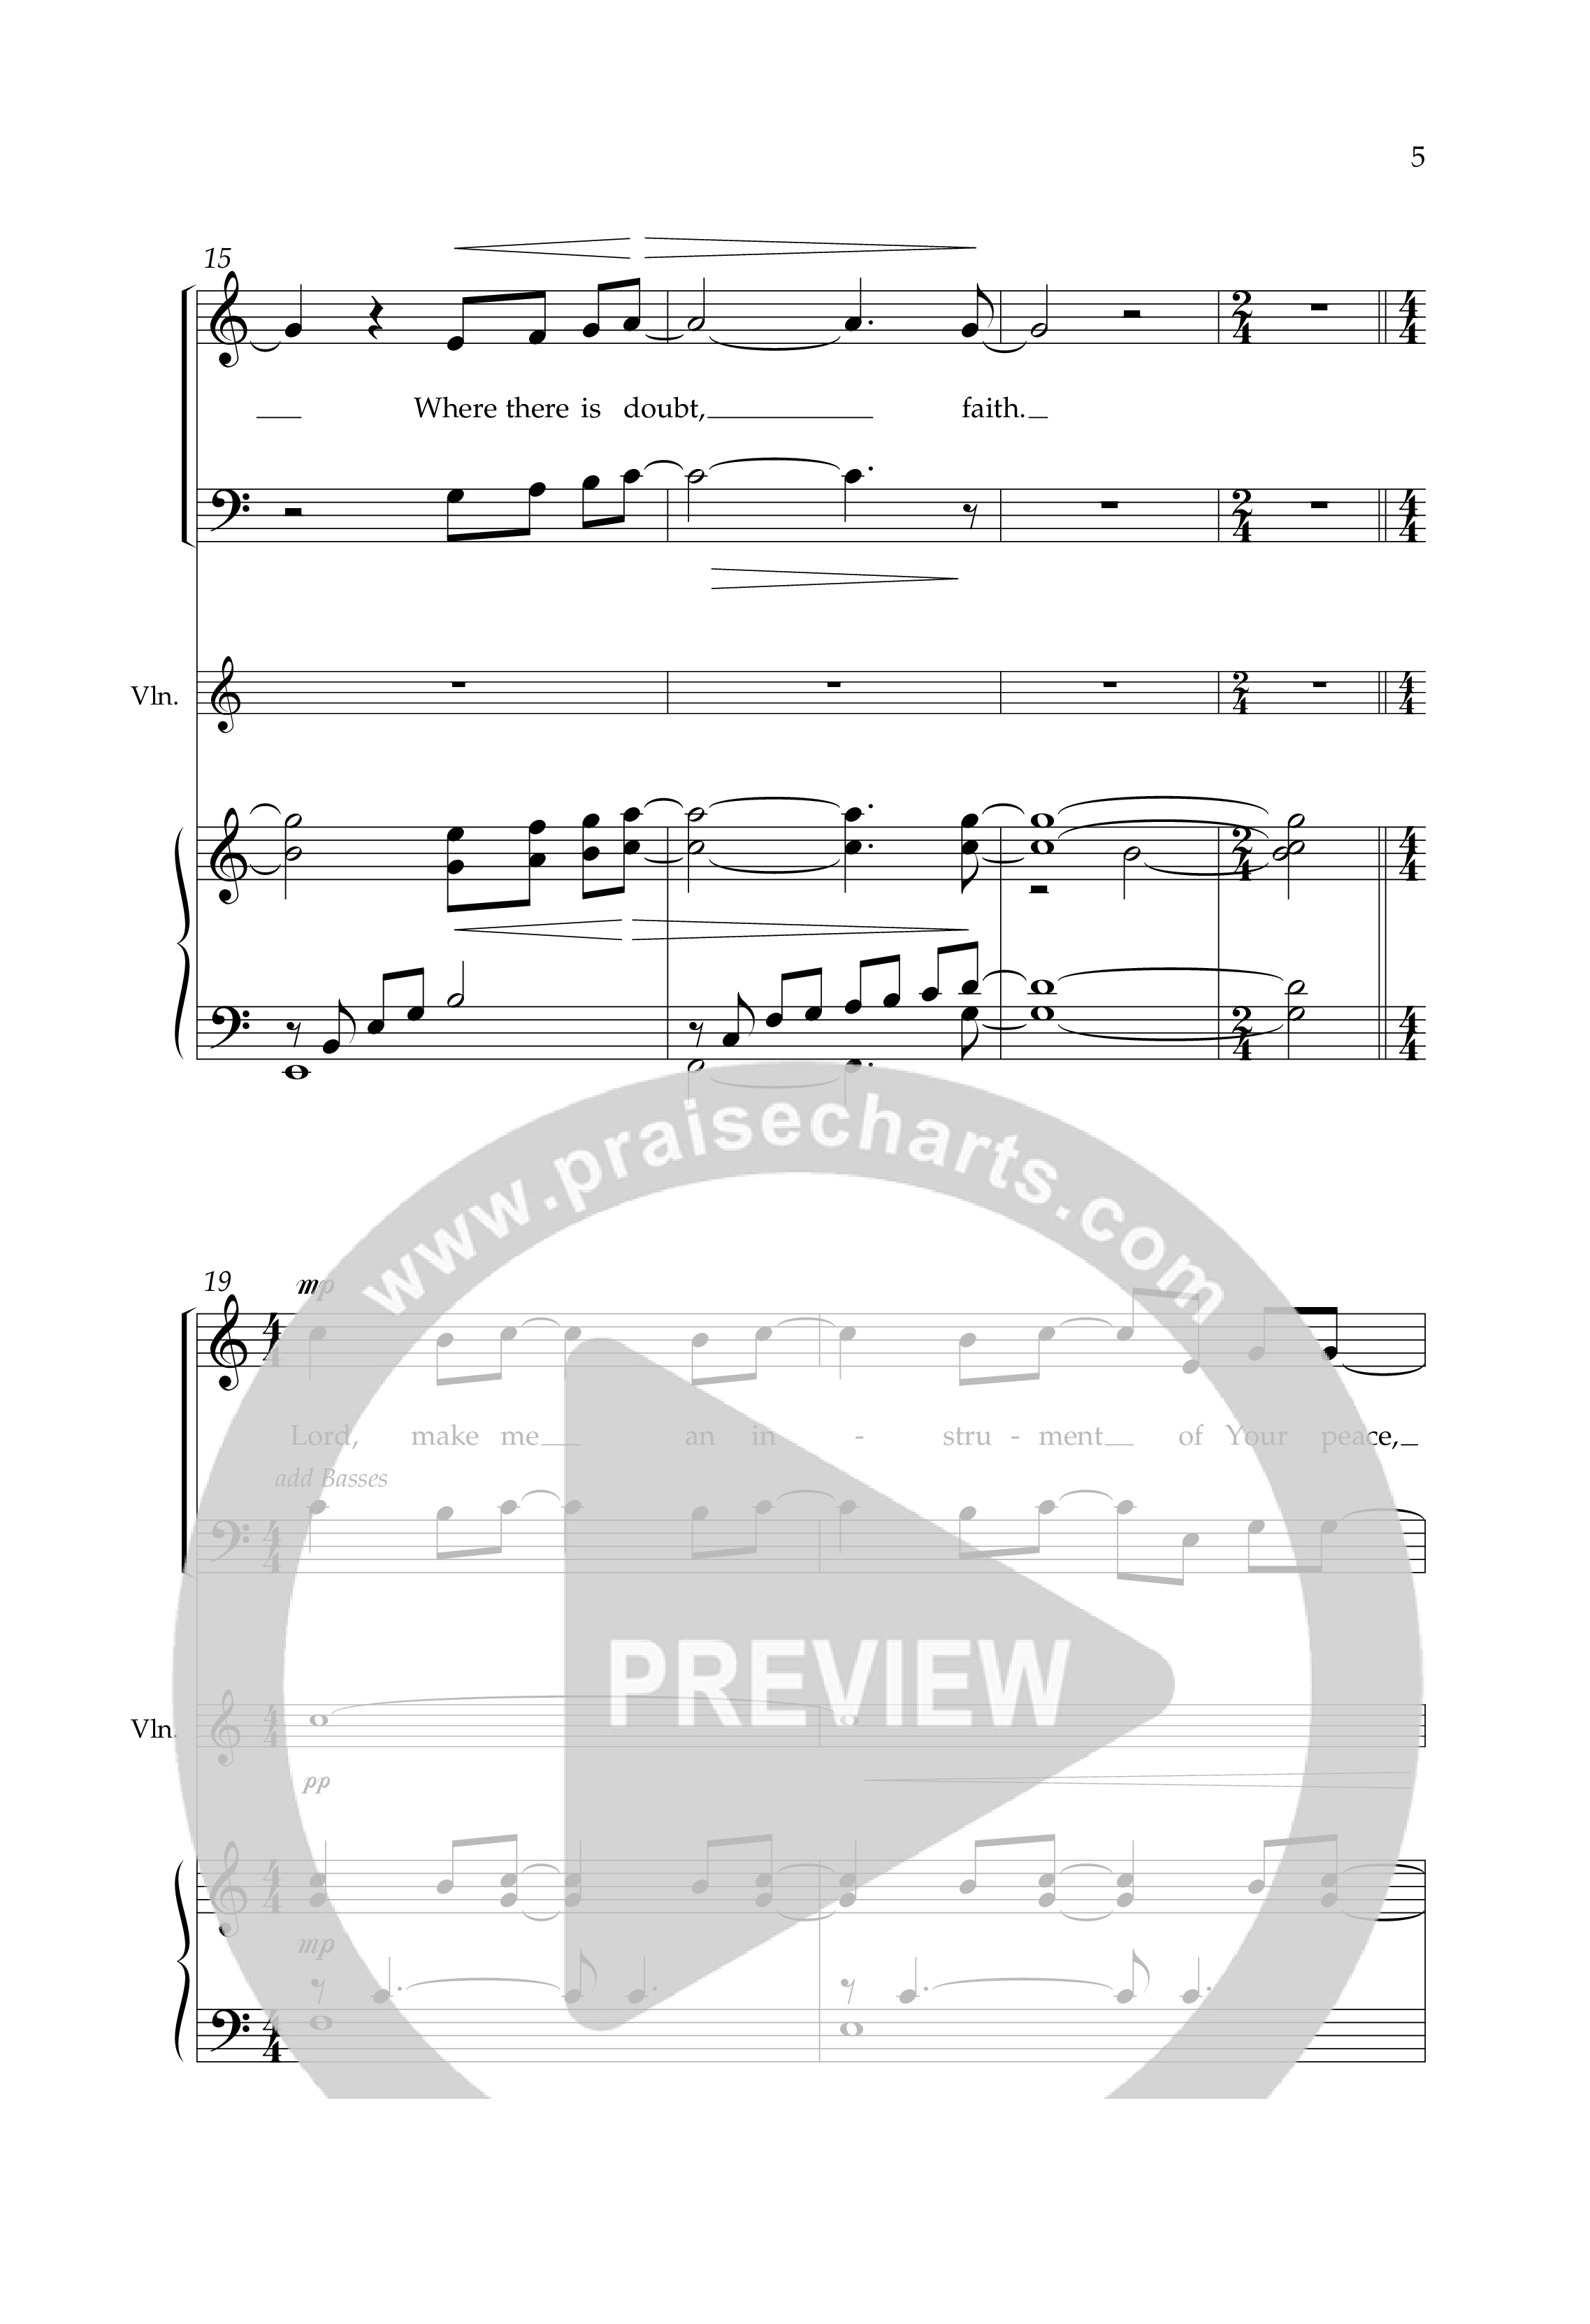 Instrument Of Your Peace (Choral Anthem SATB) Anthem (SATB/Piano) (Lifeway Choral / Arr. Phillip Keveren)